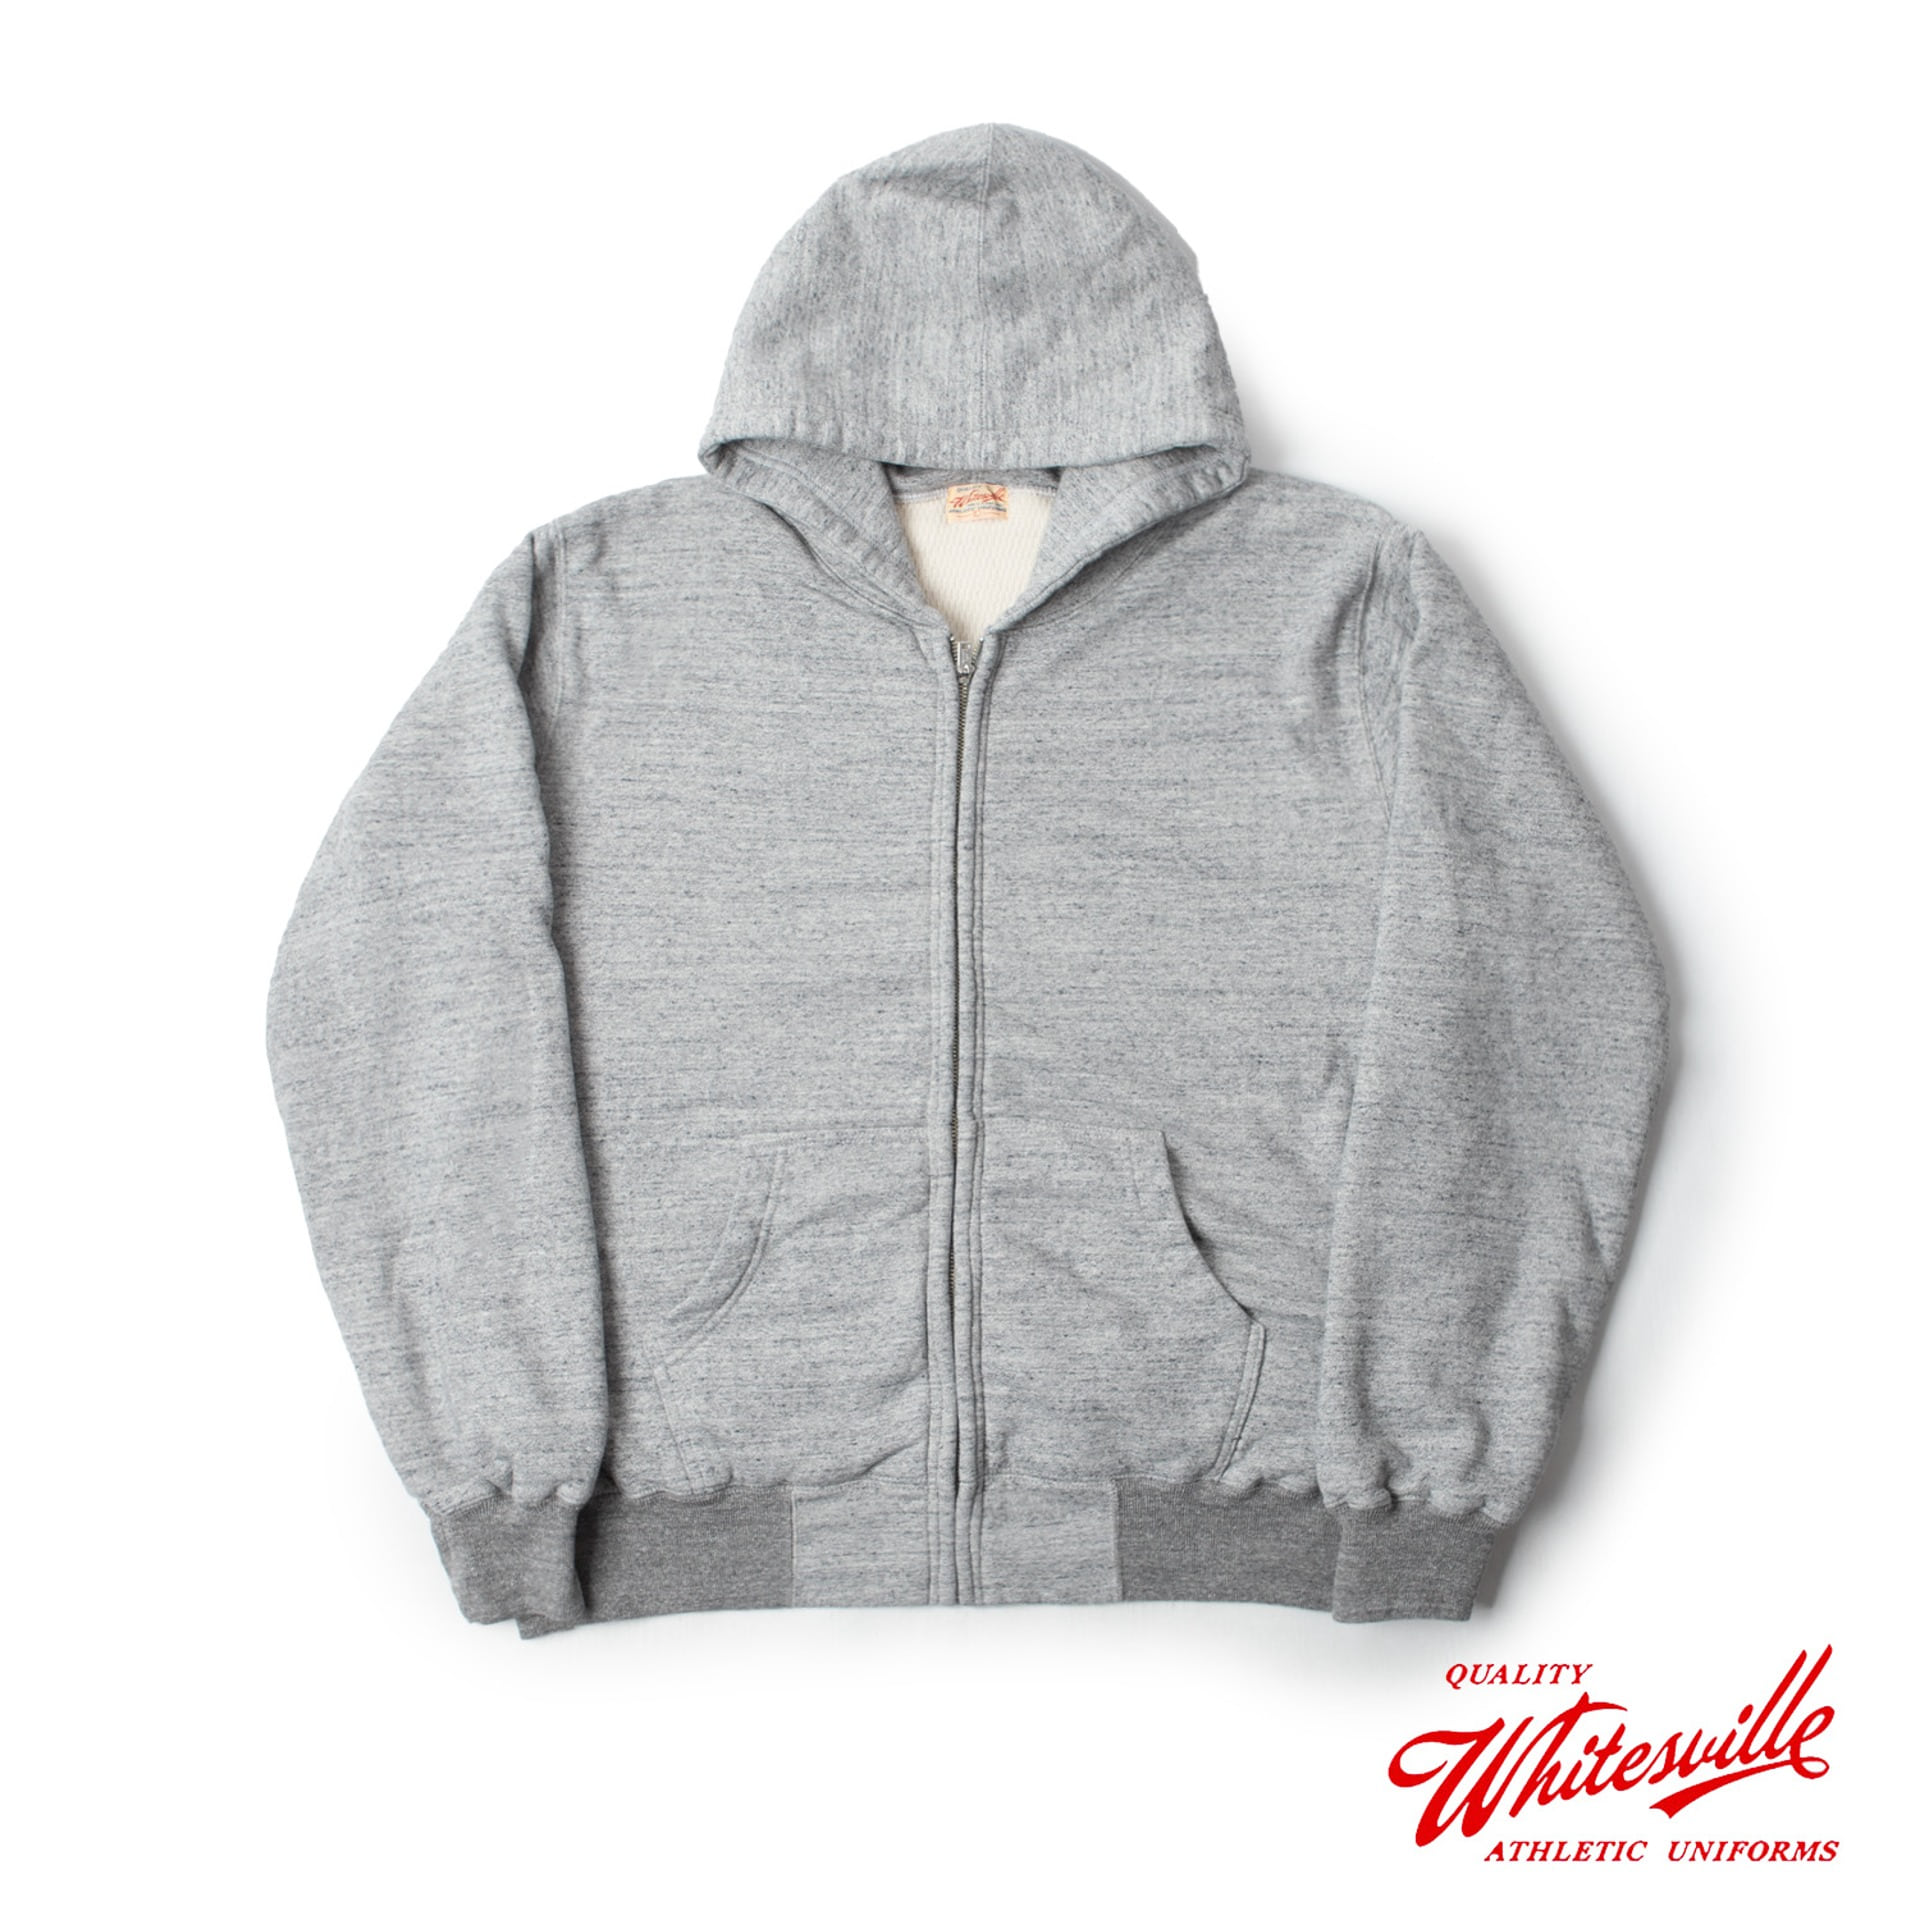 SET-IN ZIP SWEAT PARKA THERMAL LINING (Heather Grey)